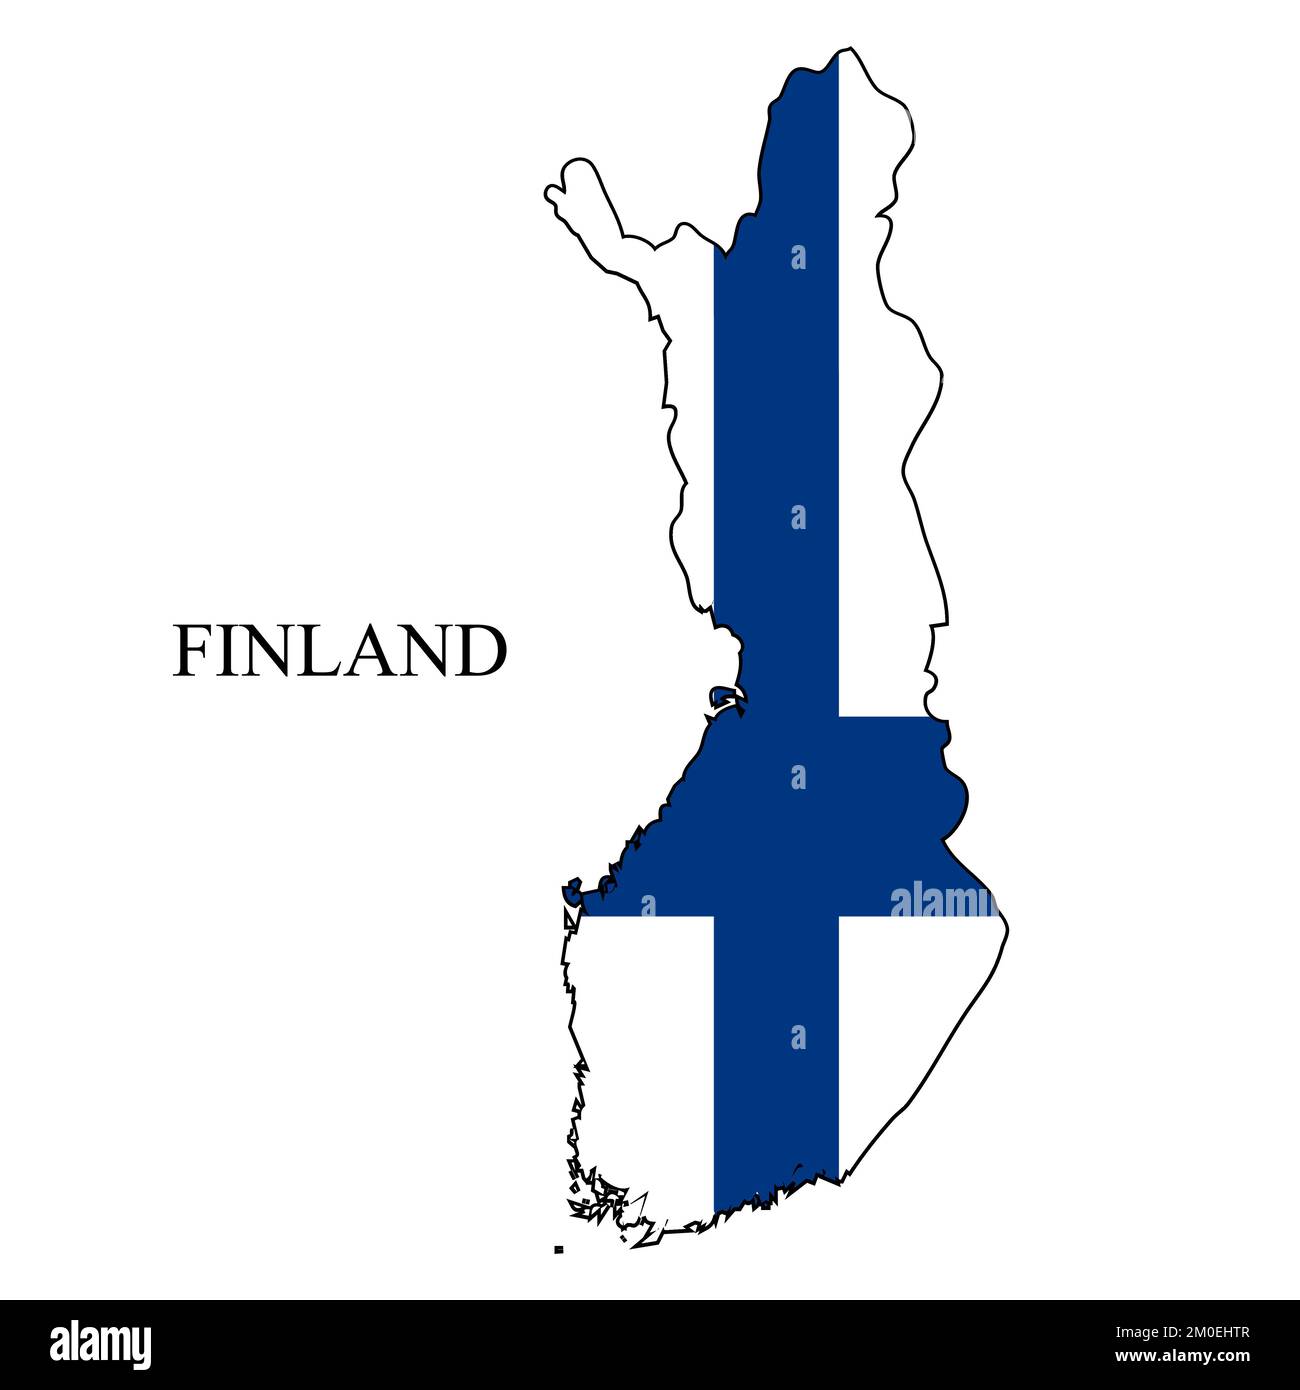 Finland map vector illustration. Global economy. Famous country. Northern Europe. Europe. Scandinavian region. Stock Vector